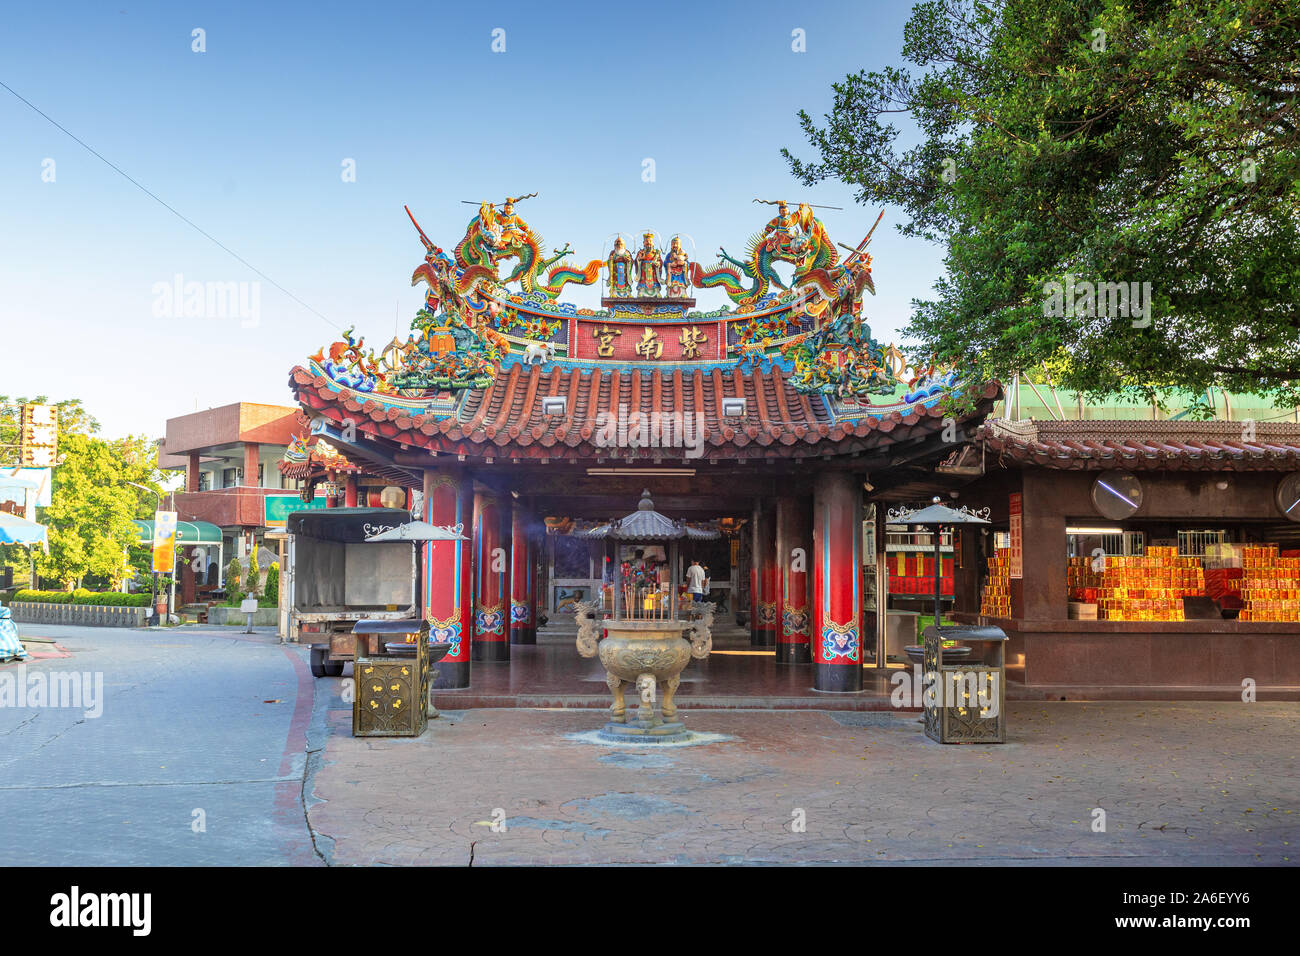 Tzunan Temple in Nantou, Taiwan.  It is known for lending 'fortune loans'. The chinese words on the board mean Tzunan Temple. Stock Photo